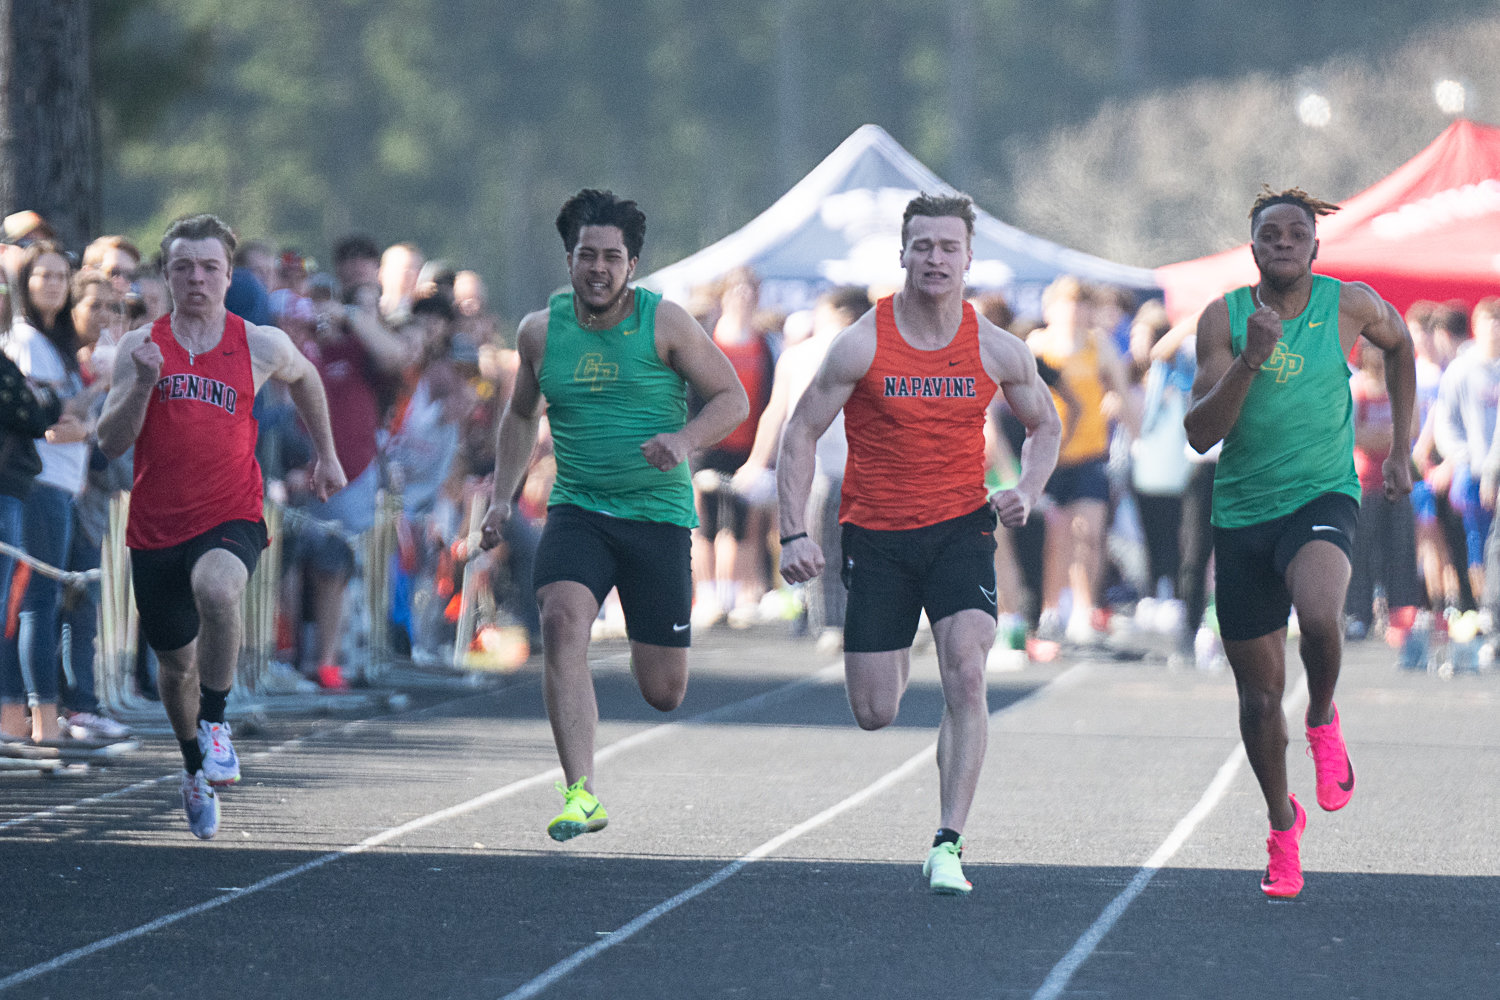 Tenino's Blaine Schott (left) and Napavine's Max O'Neill (second from right) run the 100-meter dash at the Rainier Icebreaker on March 18.